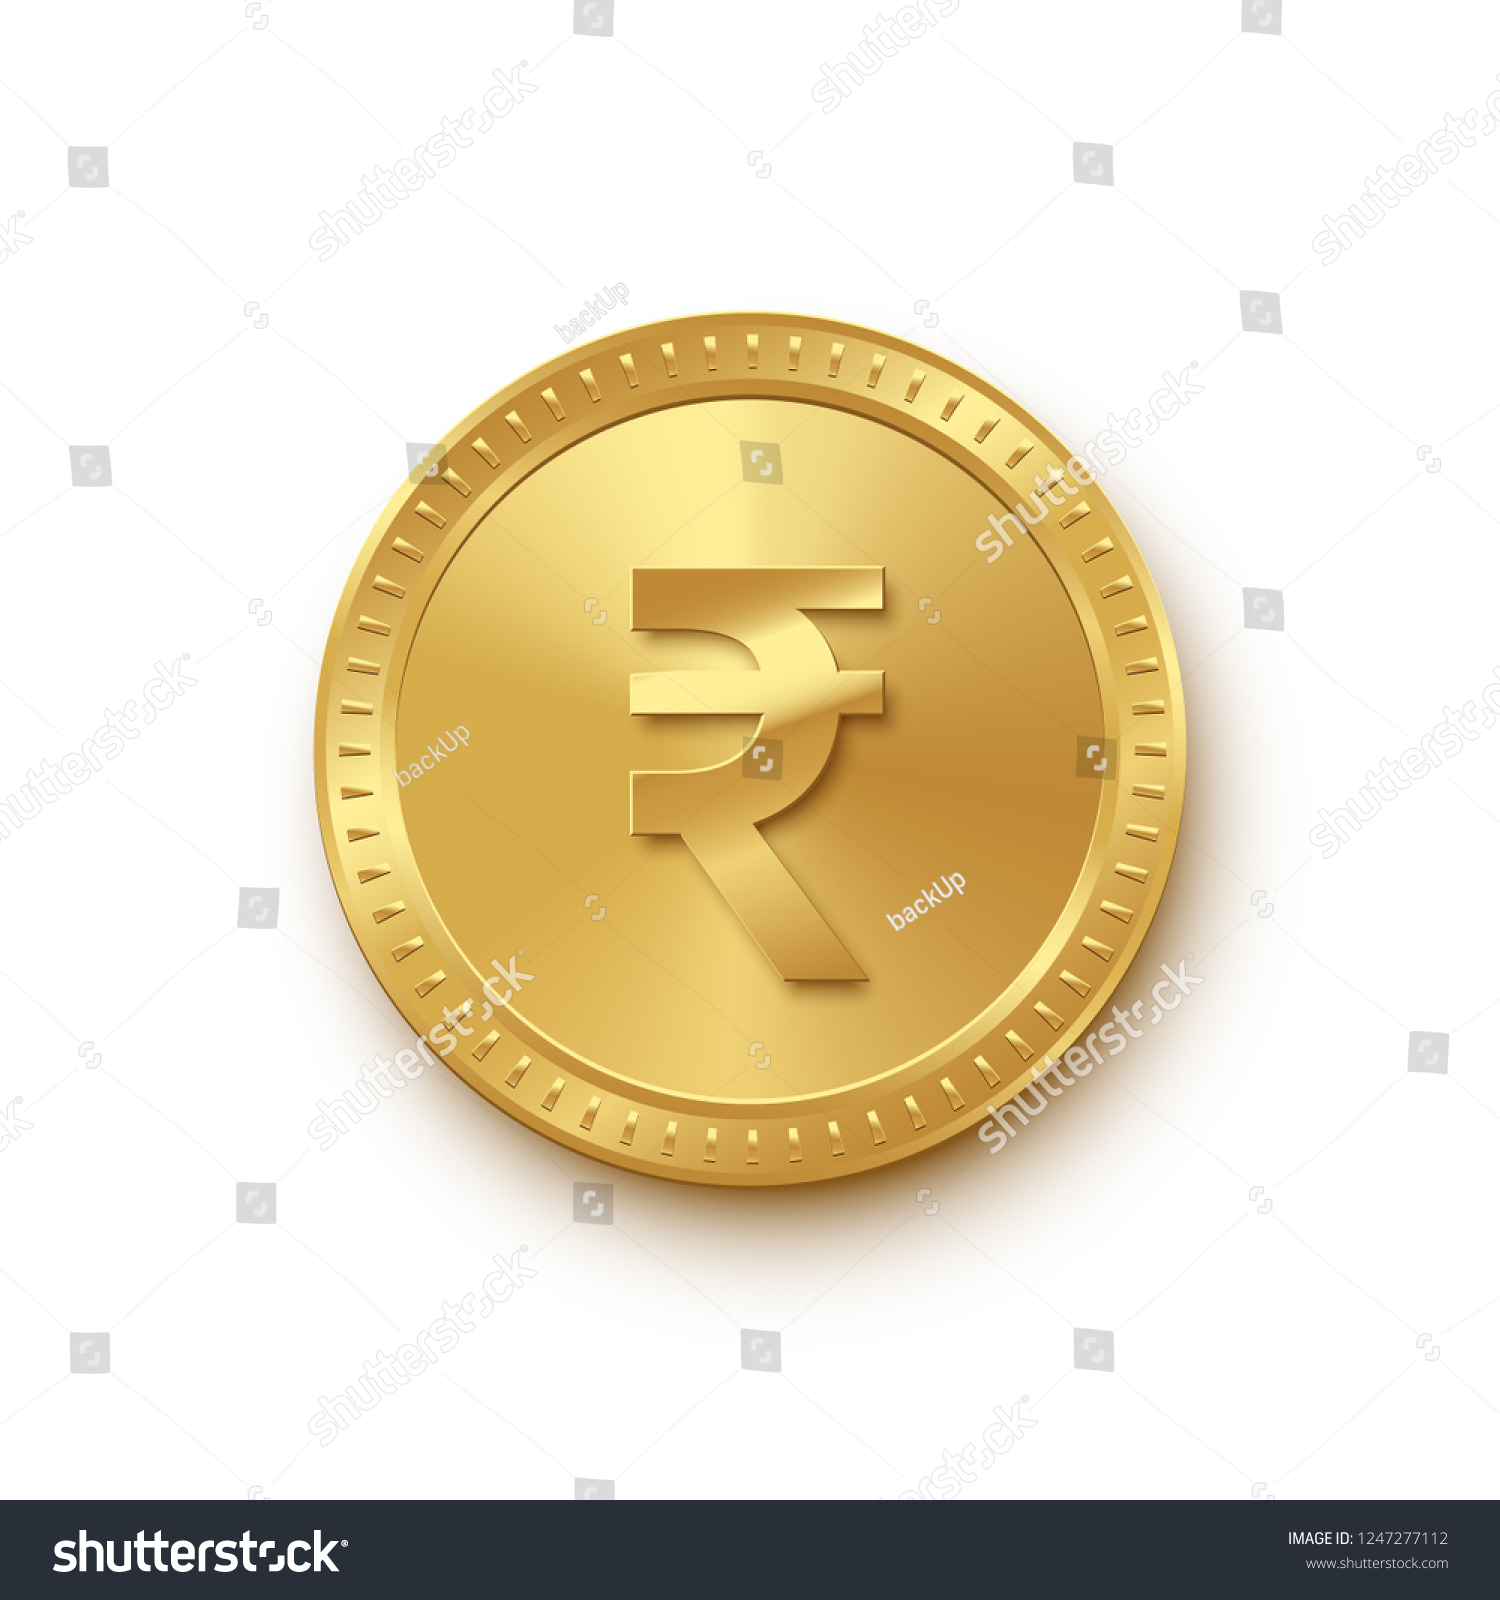 SVG of Golden isolated rupee coin on the white background. Vector finance design element svg